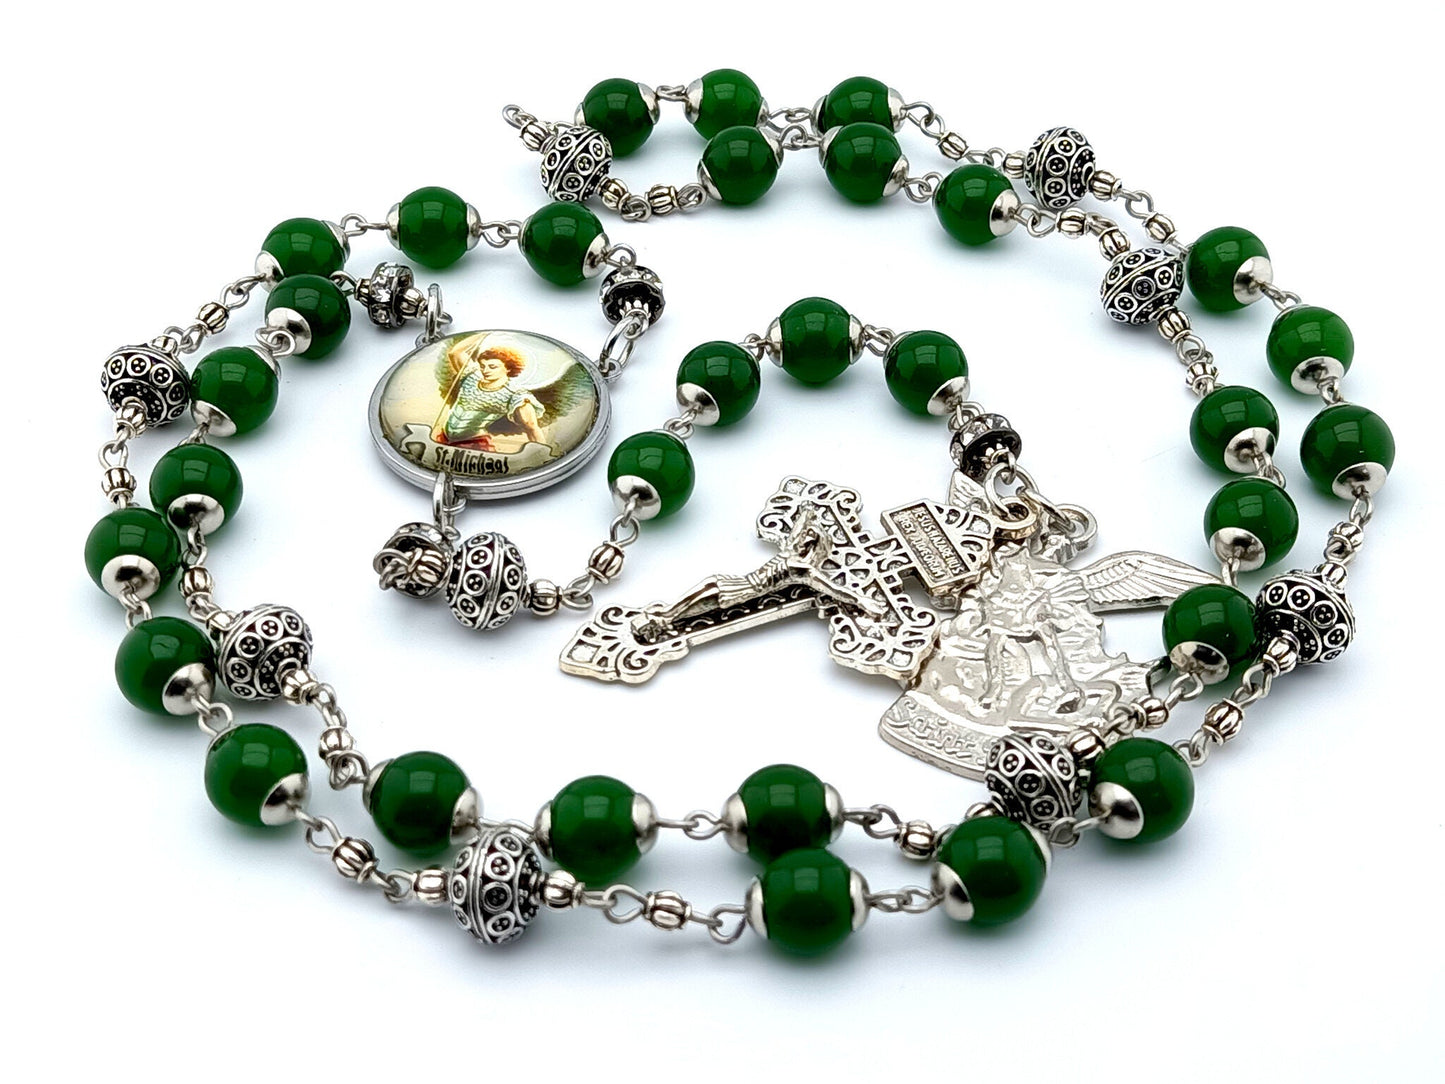 Saint Michael unique rosary beads prayer chaplet with green gemstone and silver beads, silver pardon crucifix and picture centre medal.